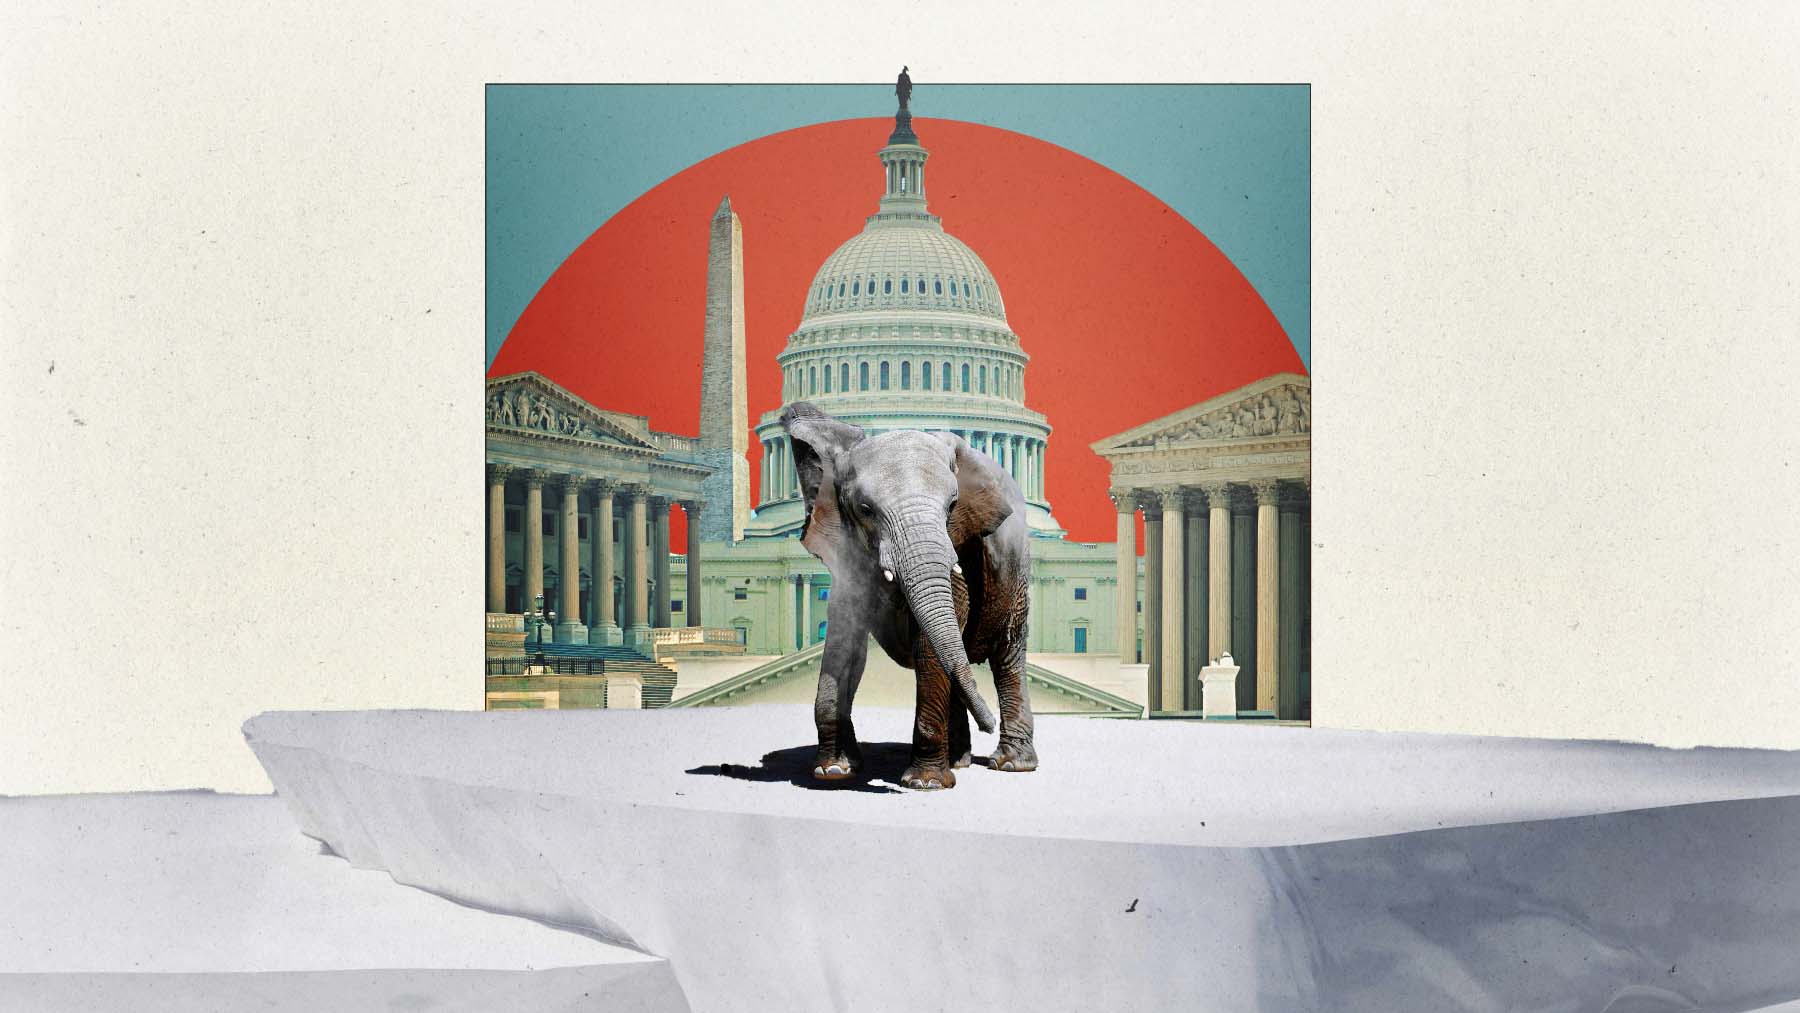 A photo illustration of an elephant standing on a platform of rocks, in front of a collaged backdrop of landmarks in Washington, DC, such as the US Capitol Building and the Supreme Court.